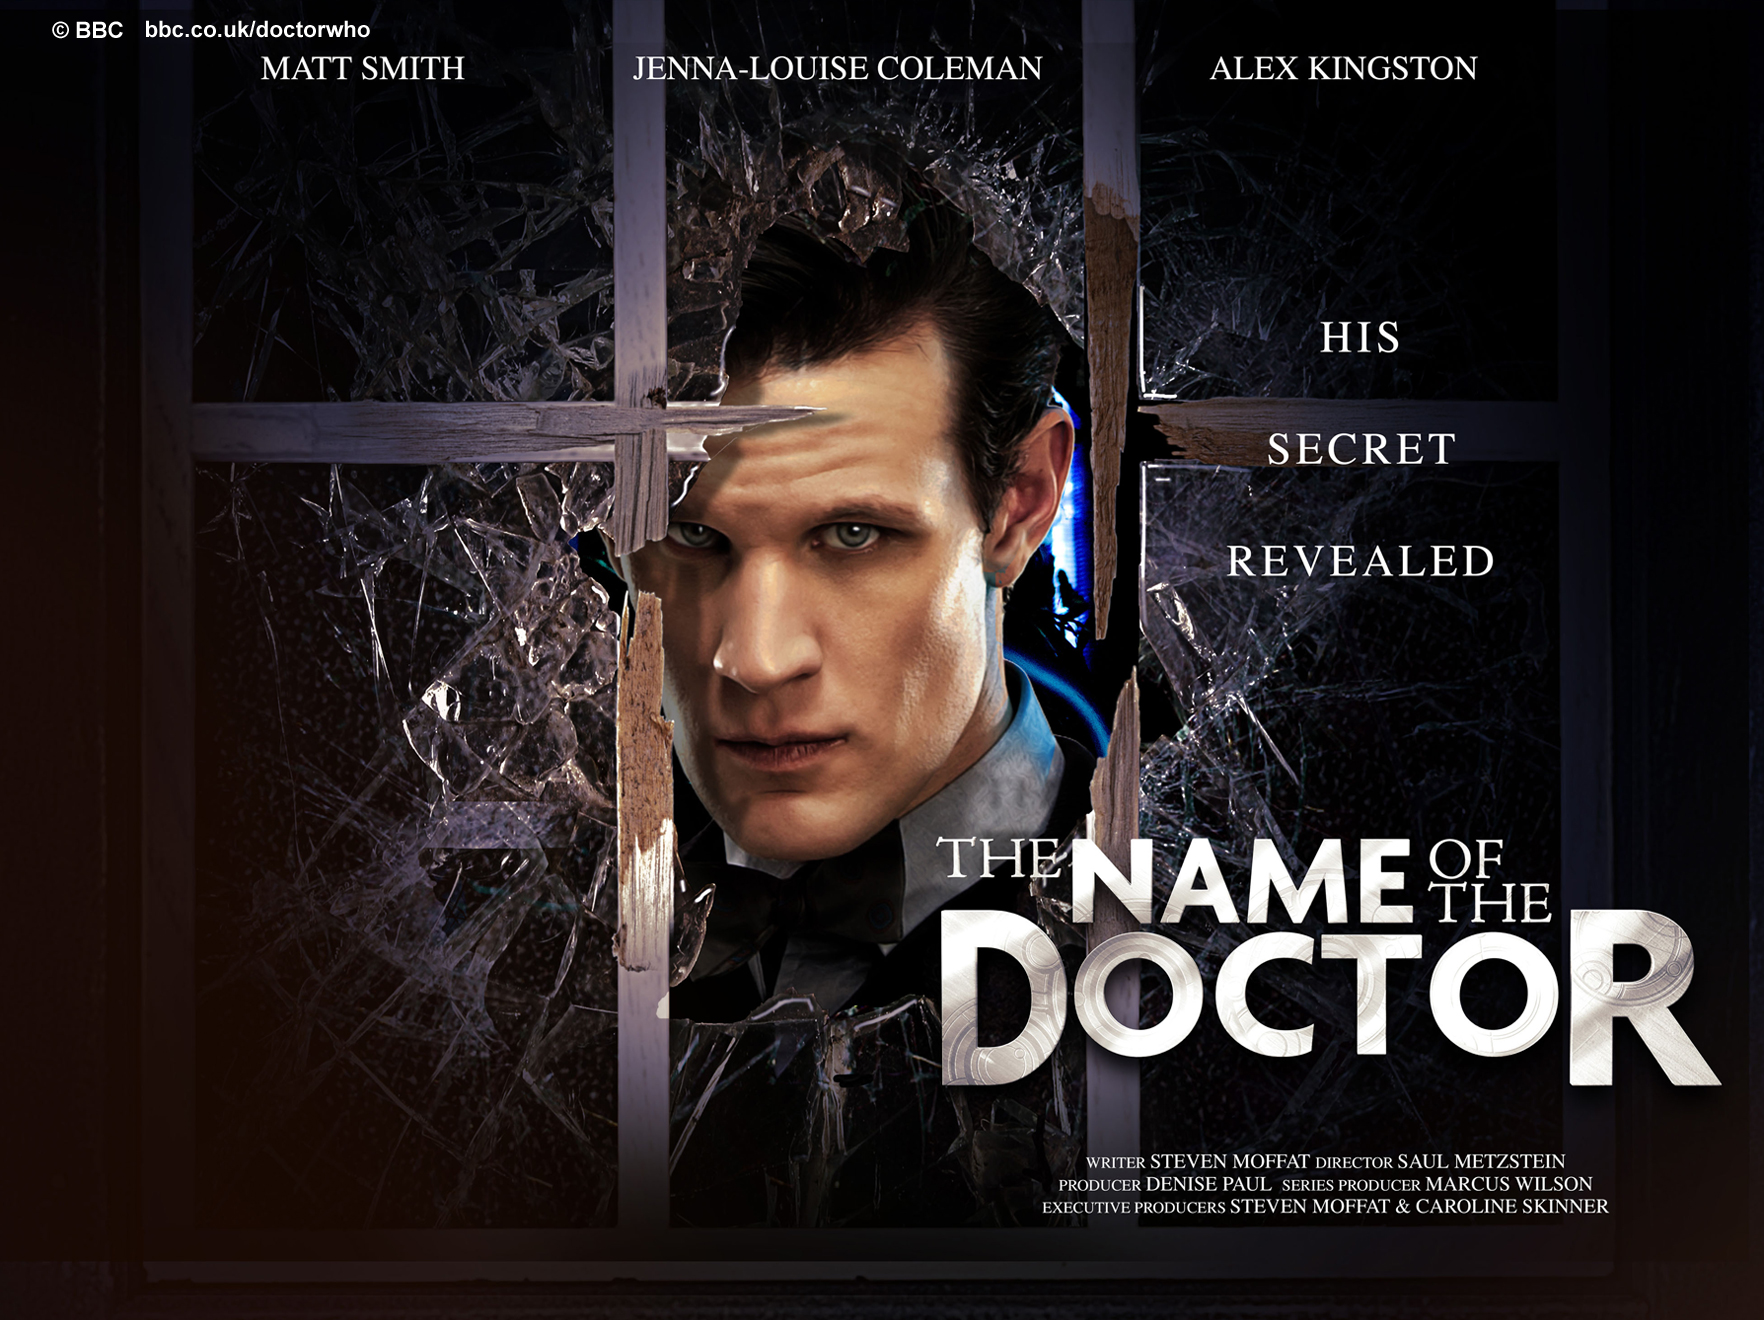 Versions Of These Amazing Doctor Who Wallpaper